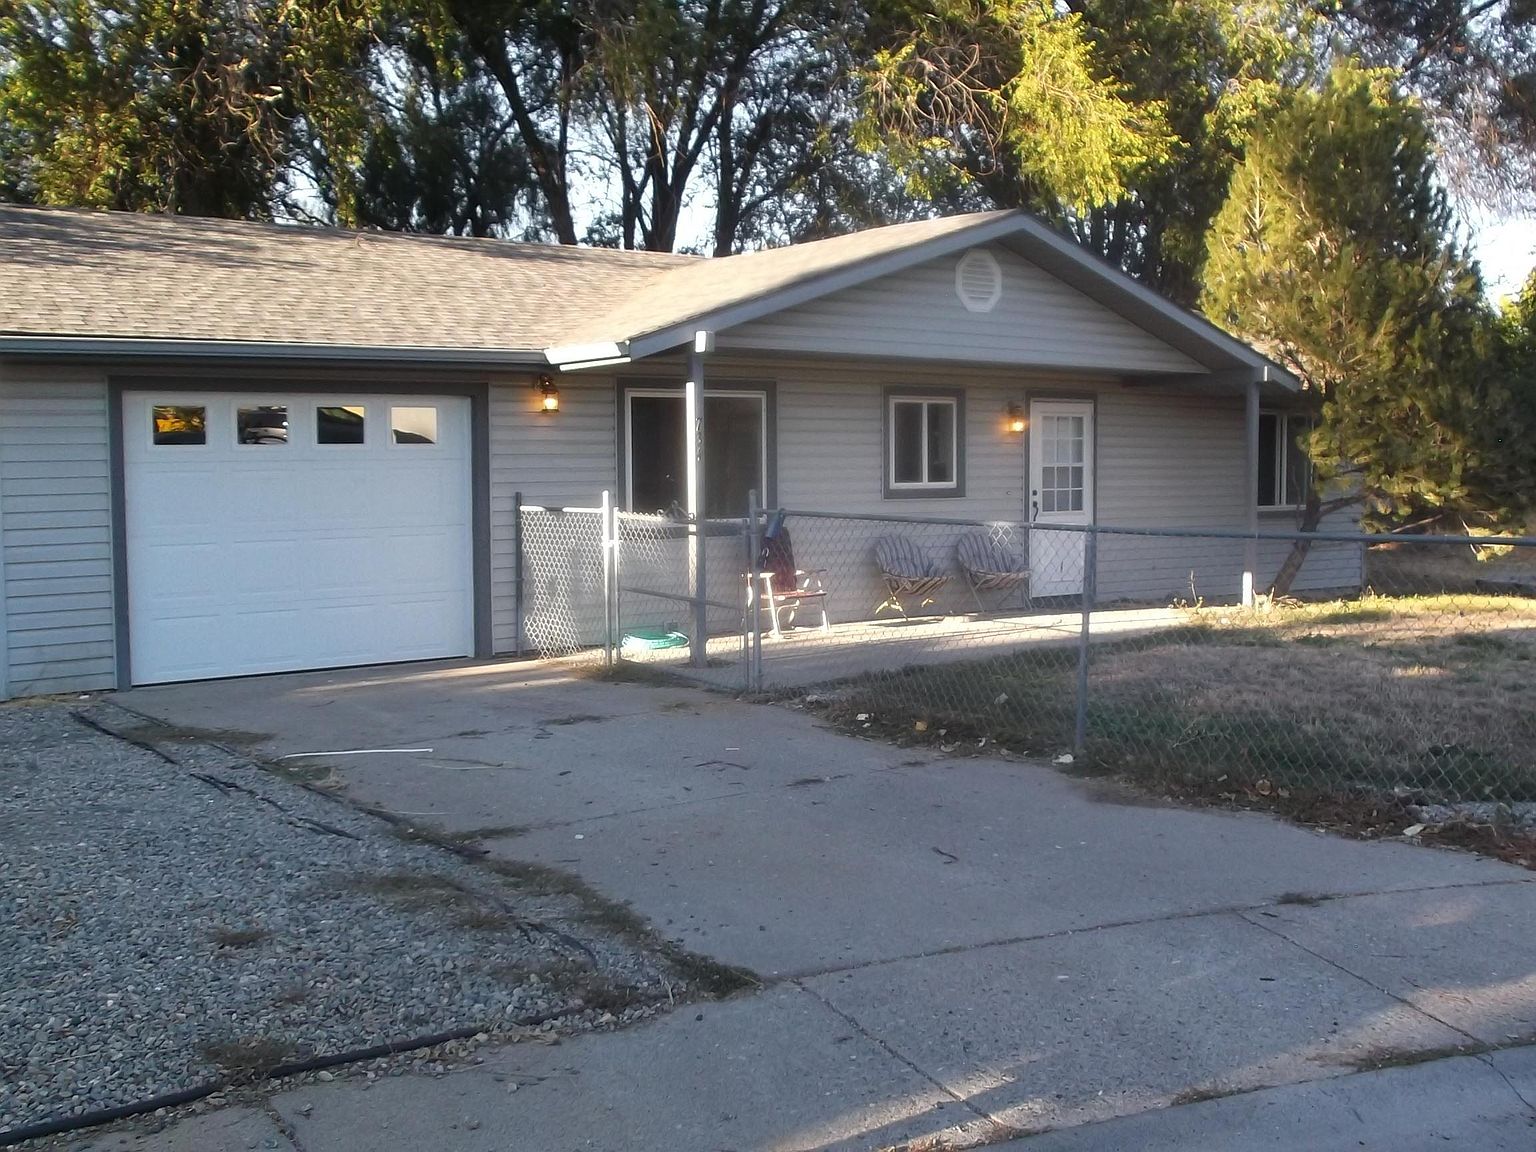 734 6th Ave E, Jerome, ID 83338 | Zillow